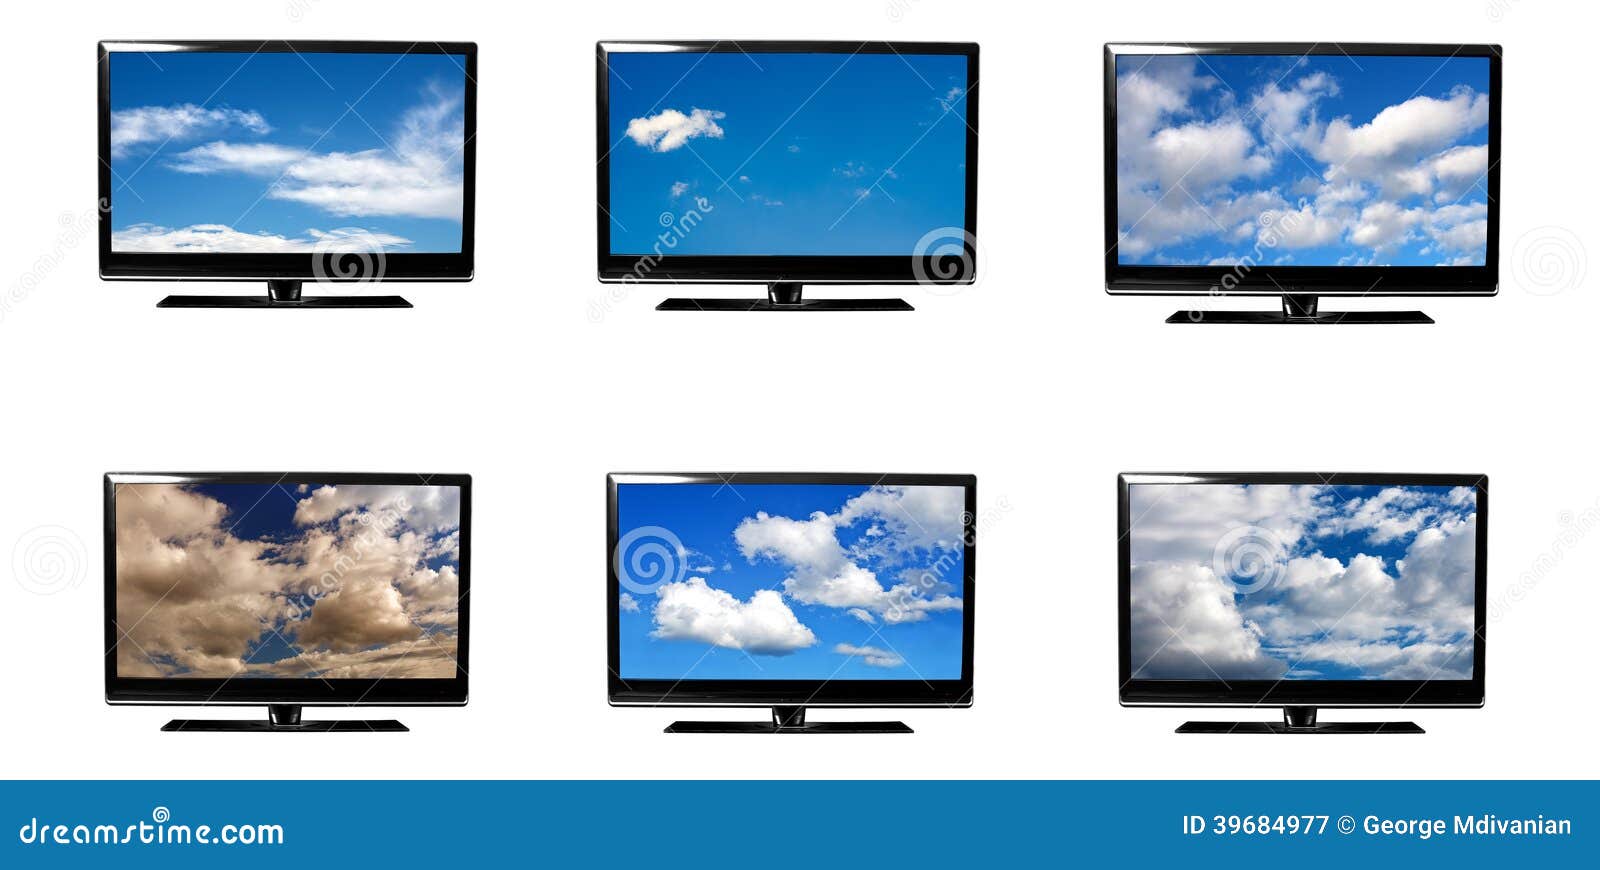 Tv screens stock image. Image of entertainment, background - 39684977